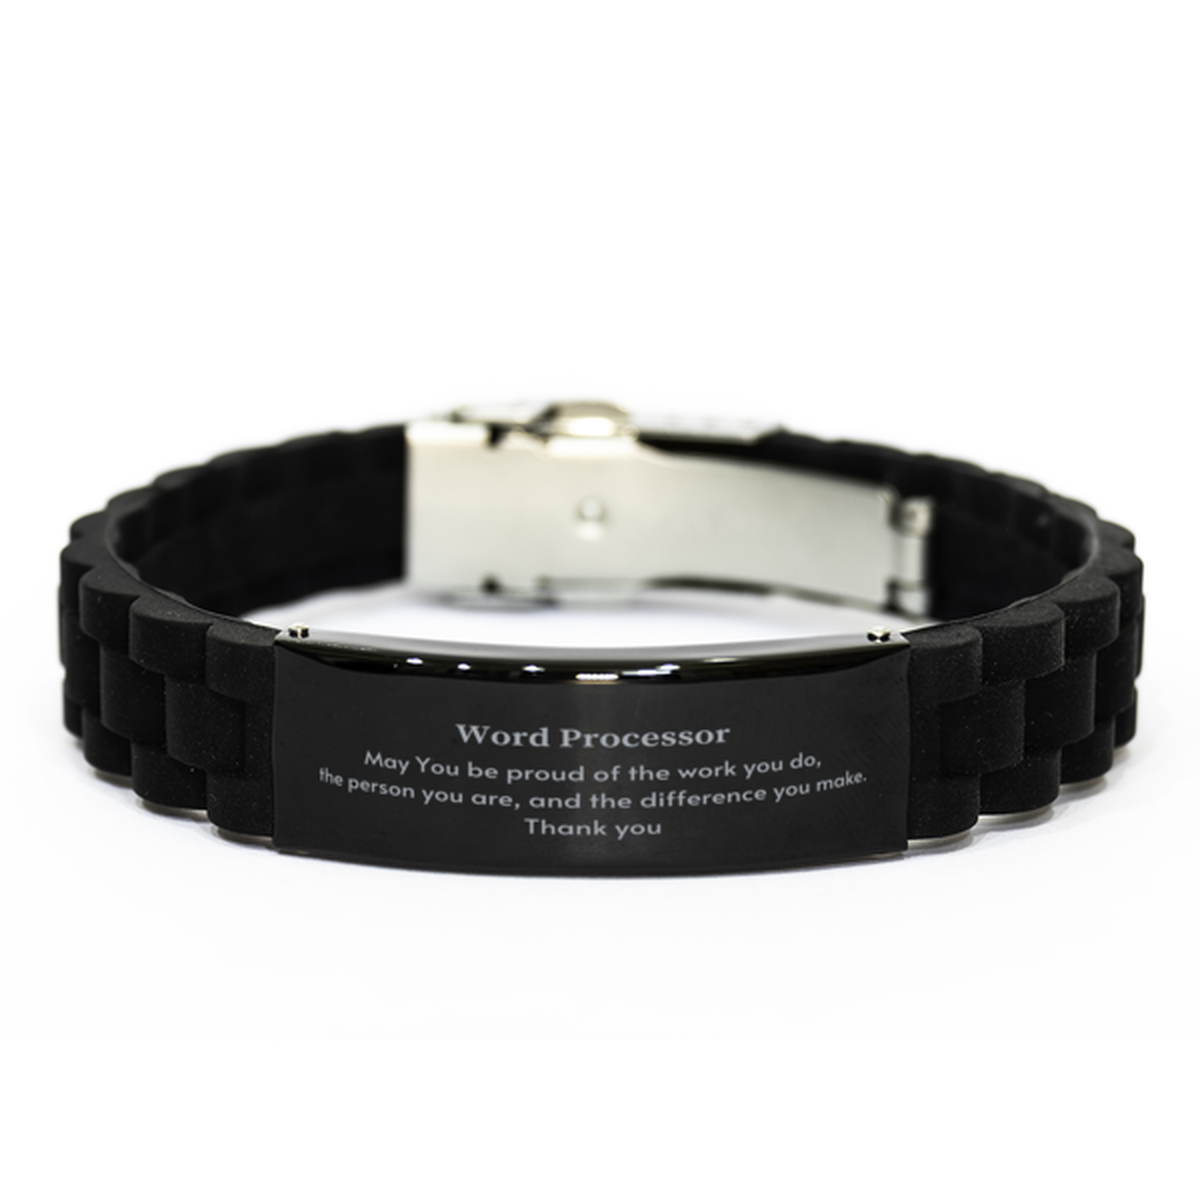 Heartwarming Black Glidelock Clasp Bracelet Retirement Coworkers Gifts for Word Processor, Word Processor May You be proud of the work you do, the person you are Gifts for Boss Men Women Friends